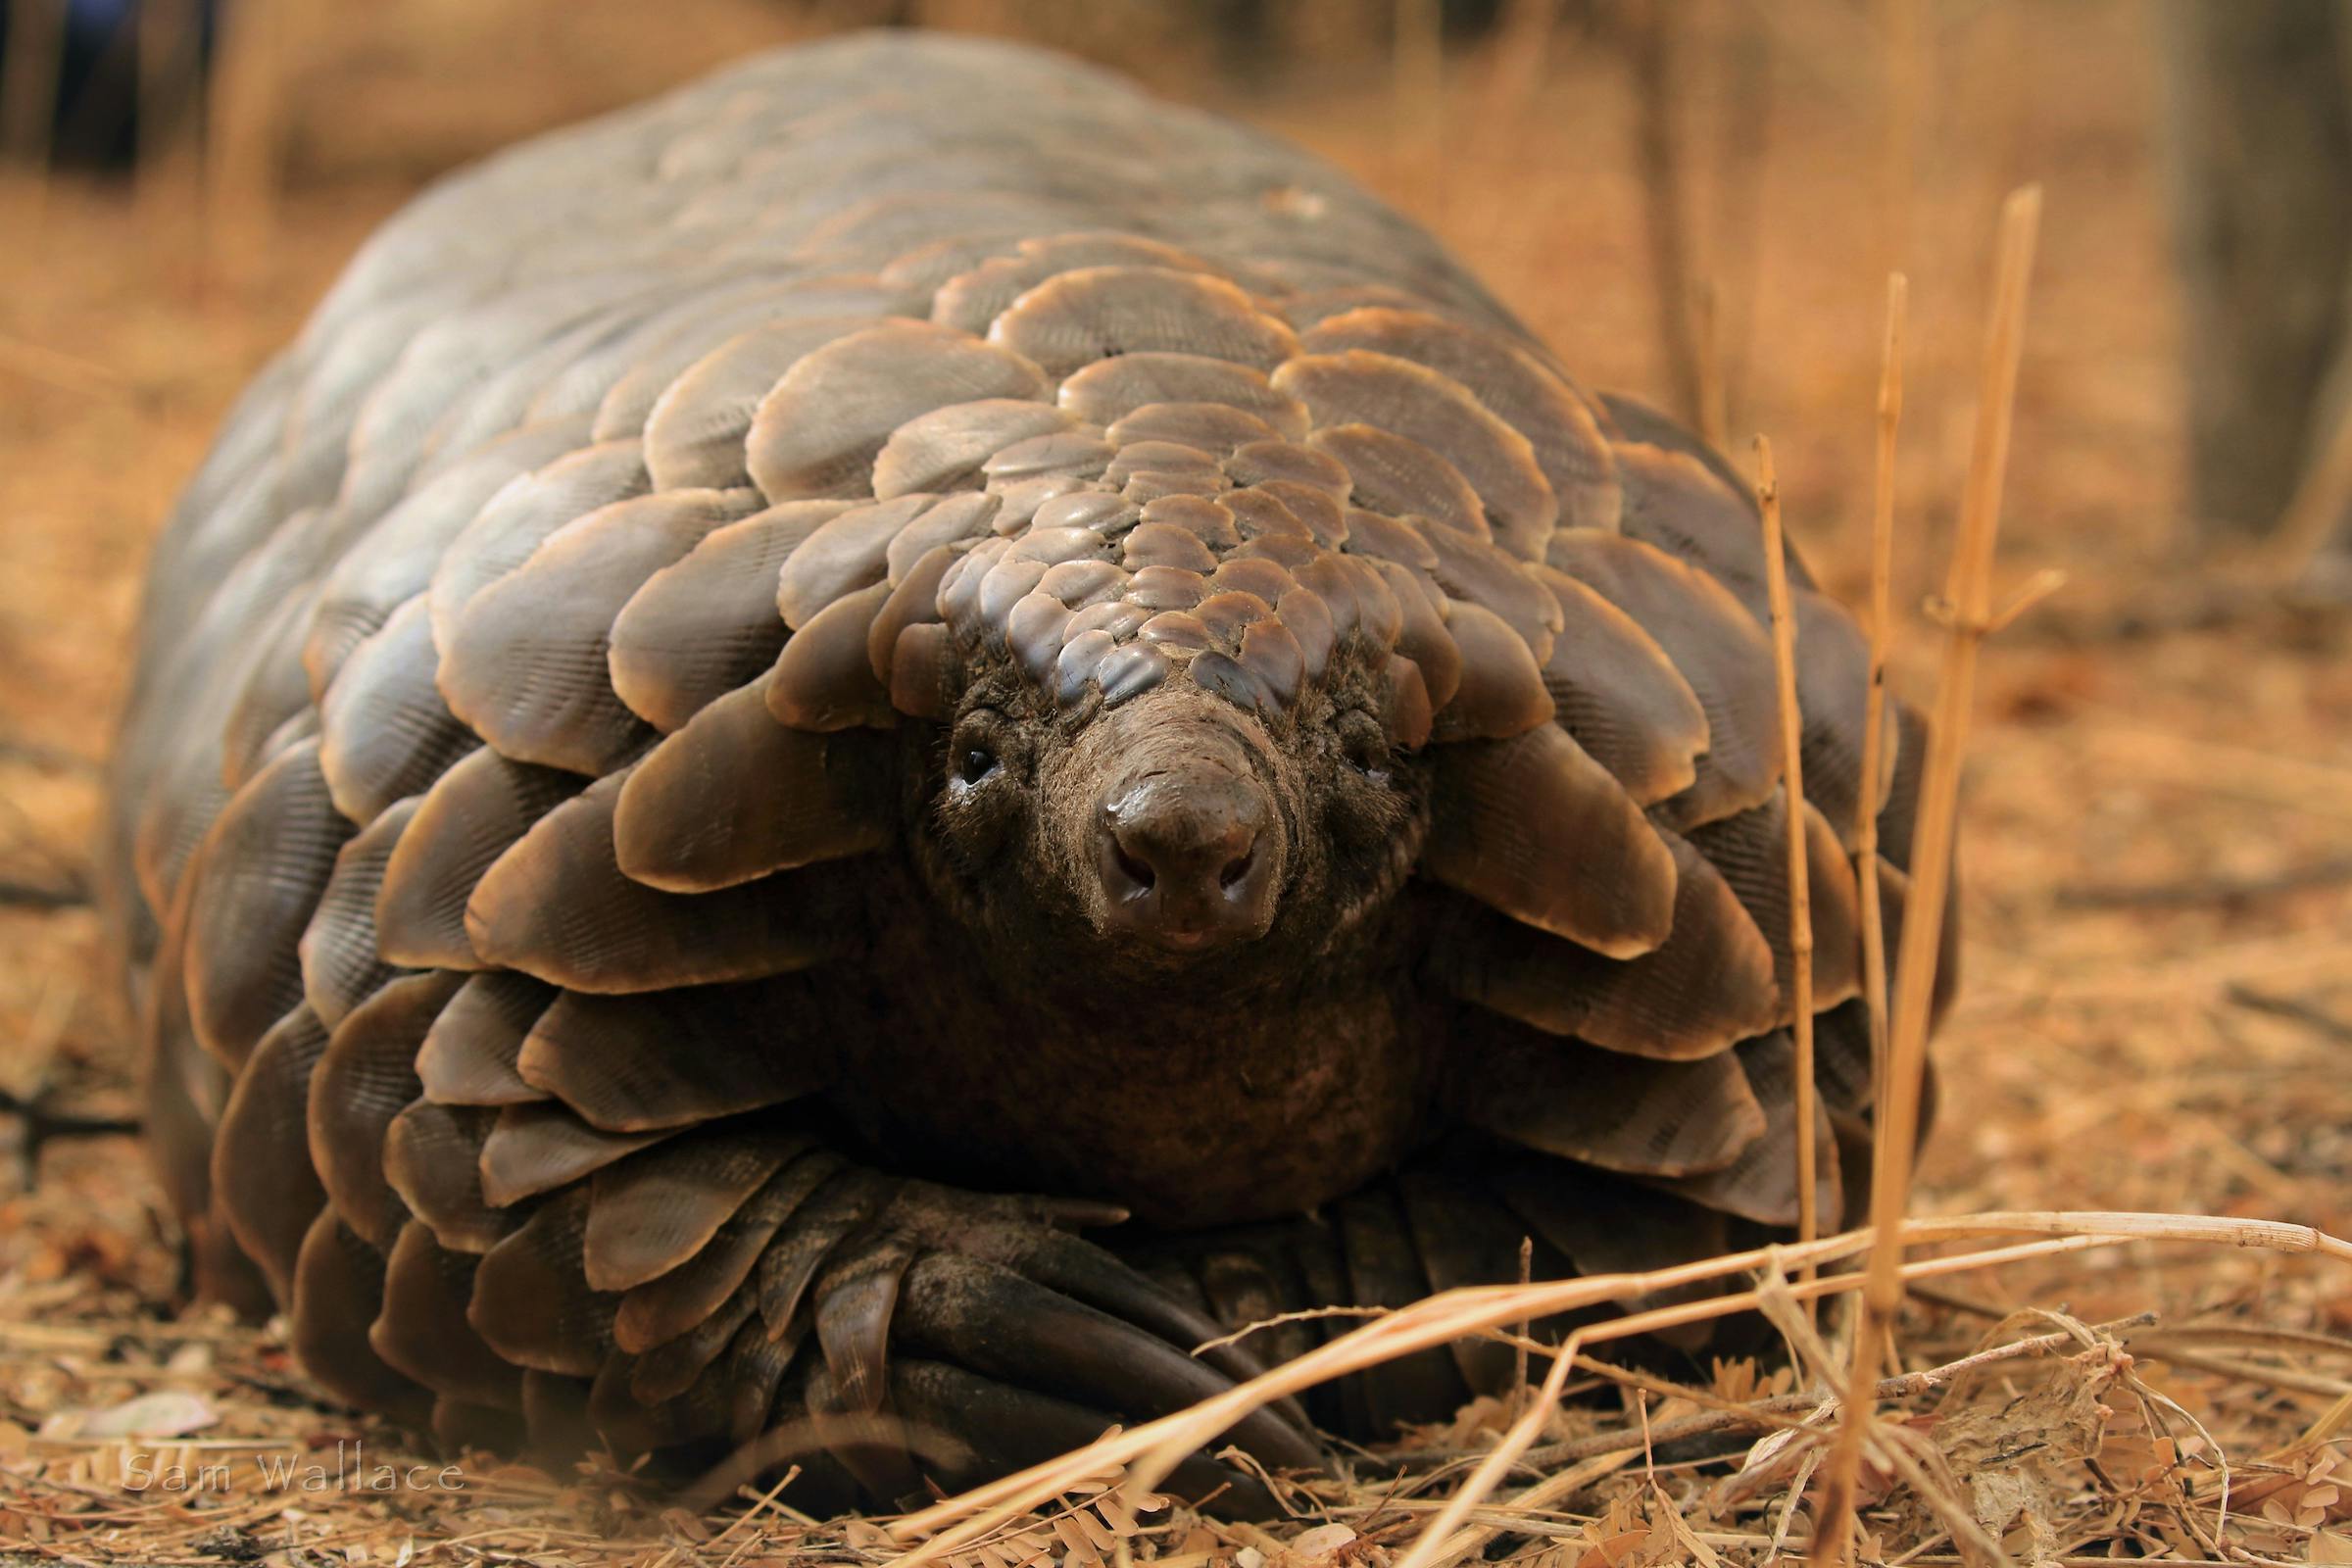 Watch the Pangolin Crisis Fund's Wildlife Conservation Expo Talk